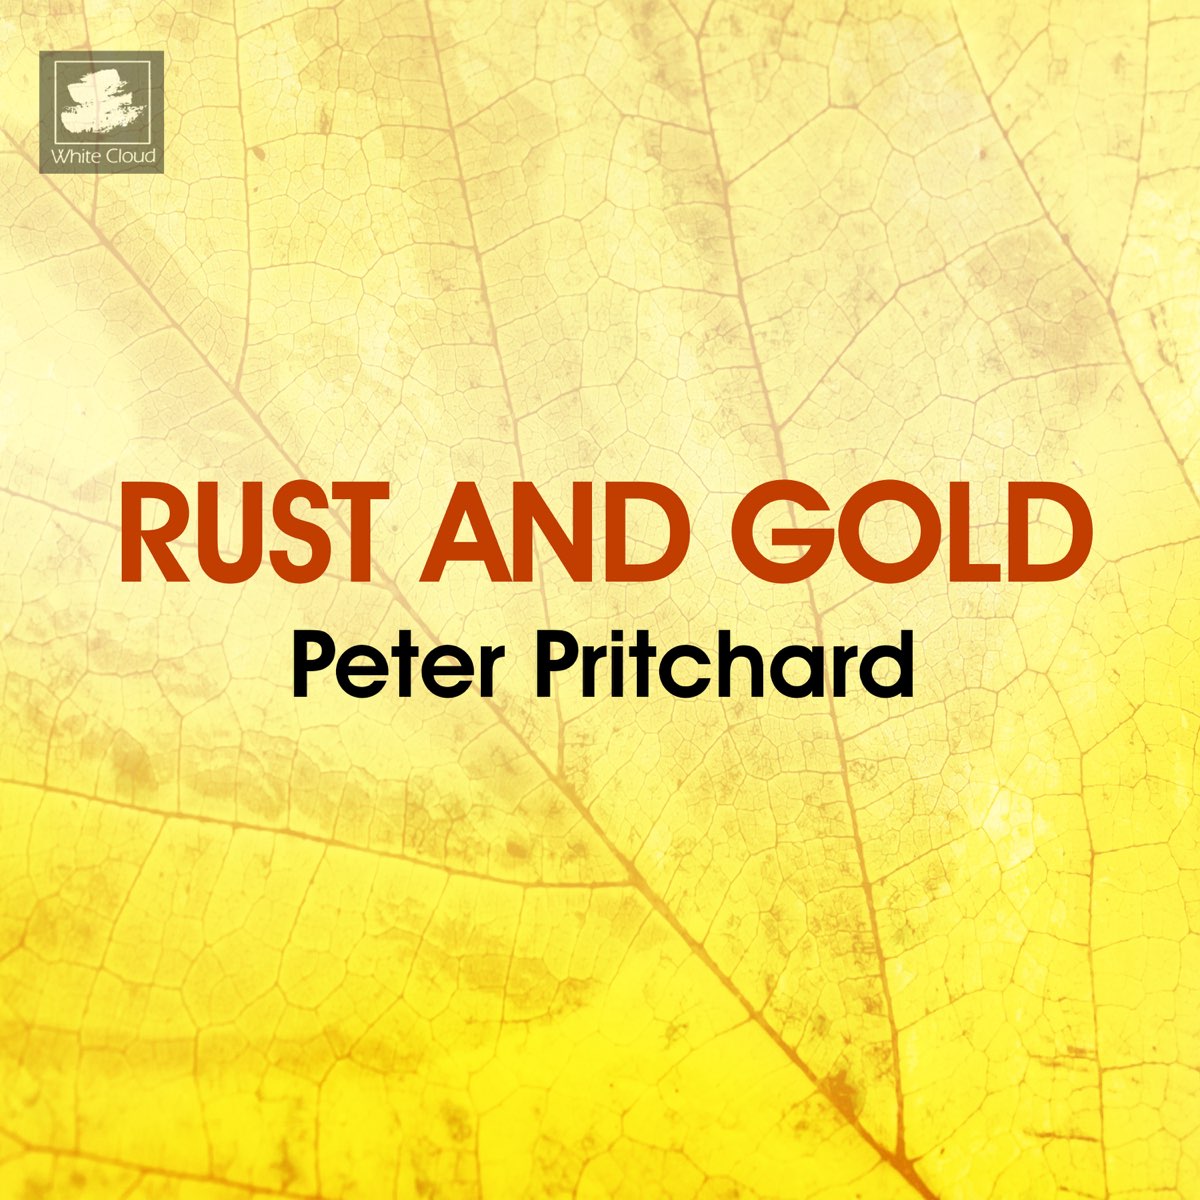 The rust and gold фото 1